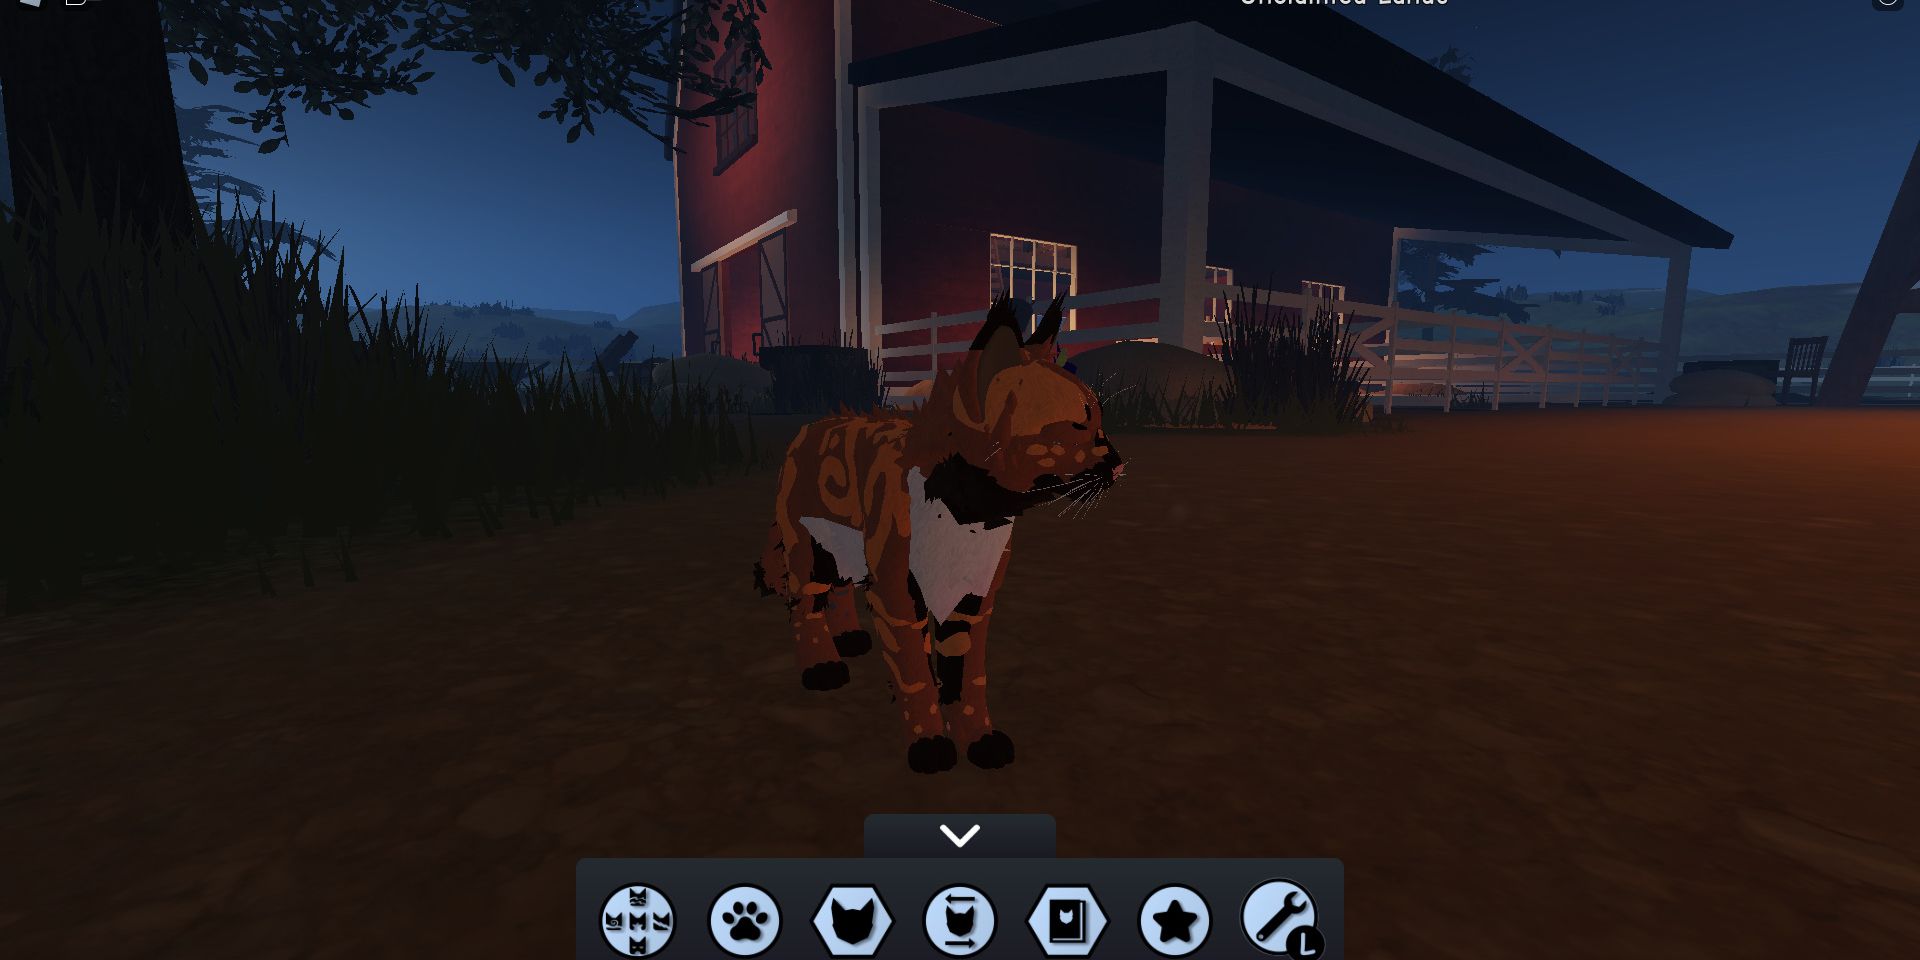 A cat character inside the barn yard at night in Roblox Warrior Cats